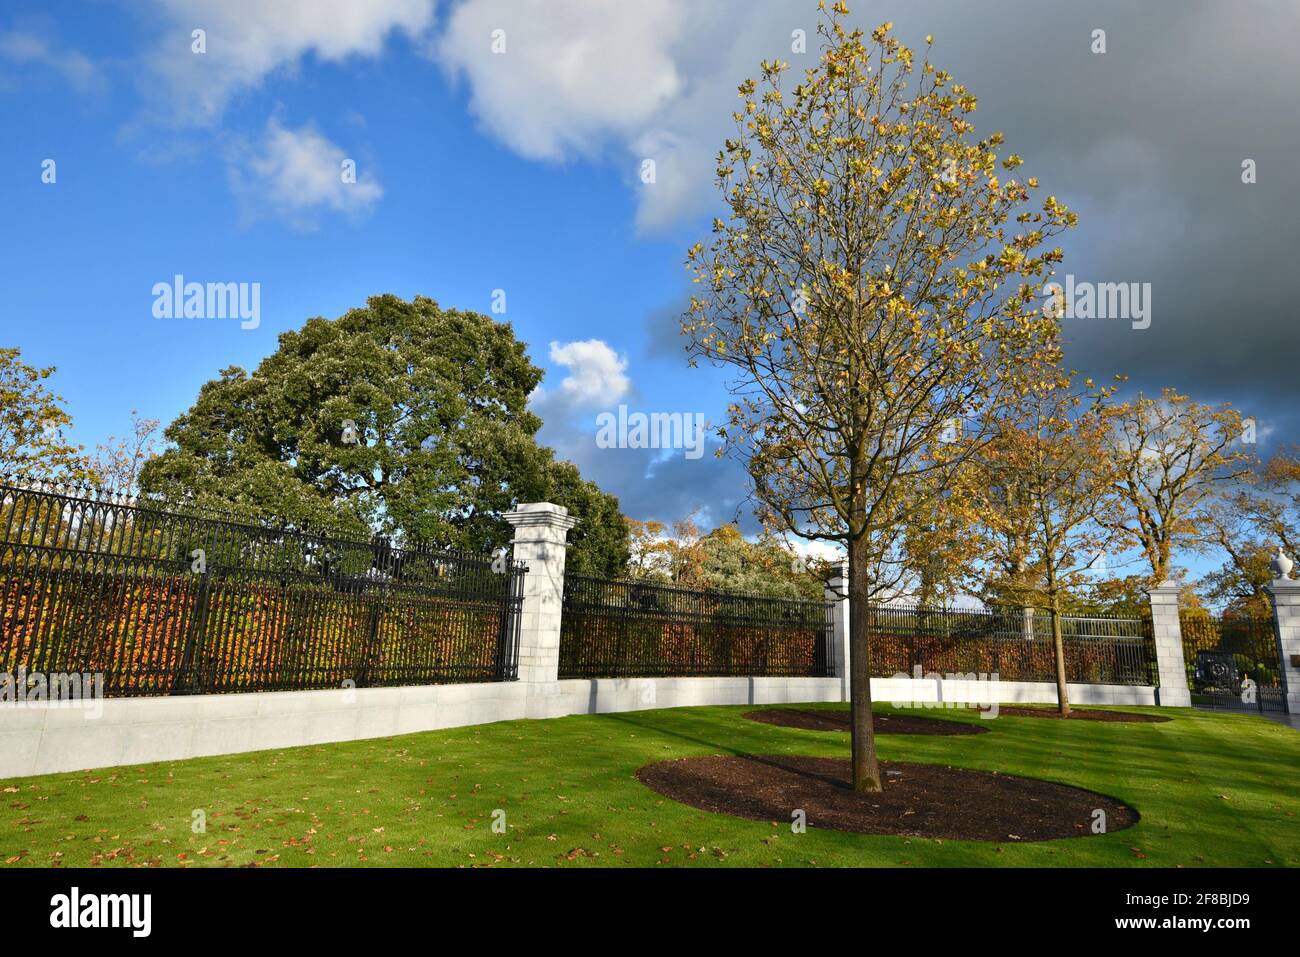 Landscape with scenic main entrance and gardens view of the luxury golf resort Adare Manor on the banks of River Maigue in Adare, Limerick Ireland. Stock Photo